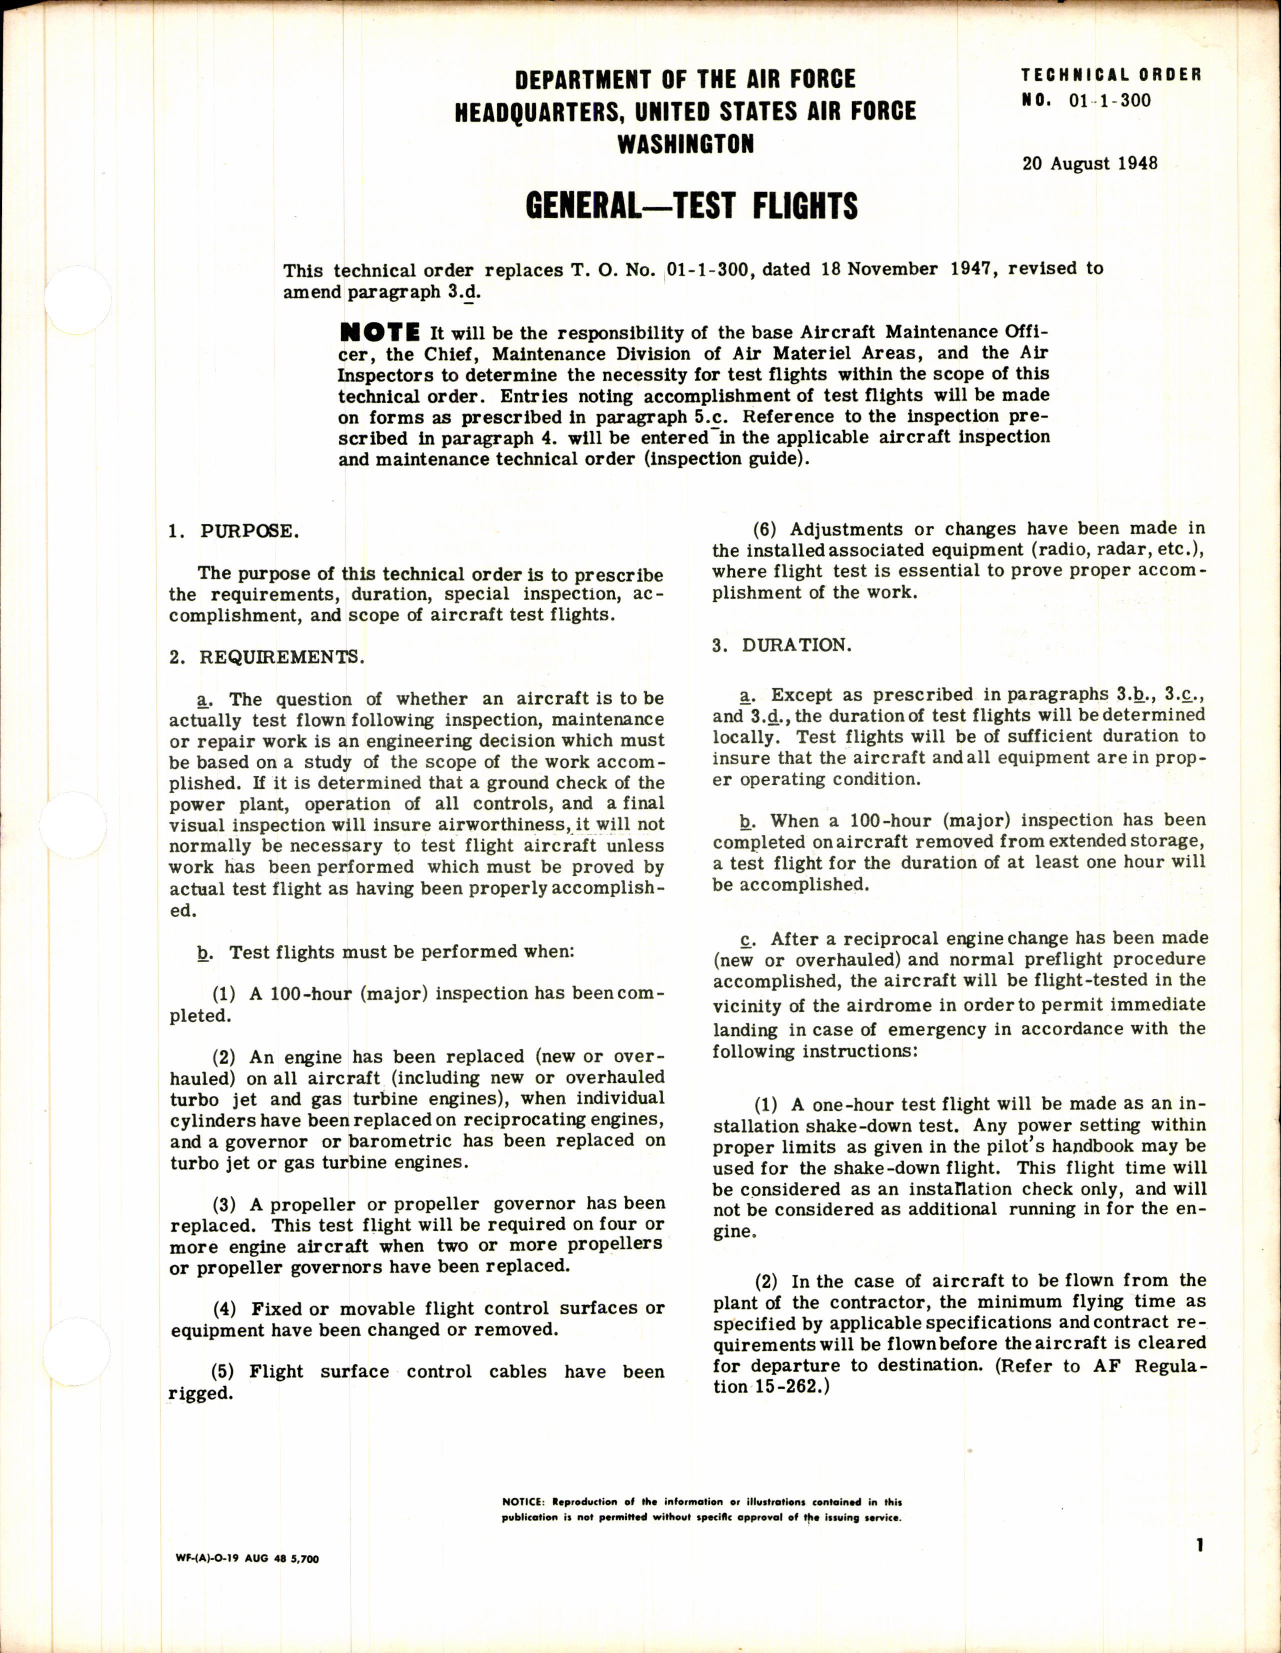 Sample page 1 from AirCorps Library document: Test Flights